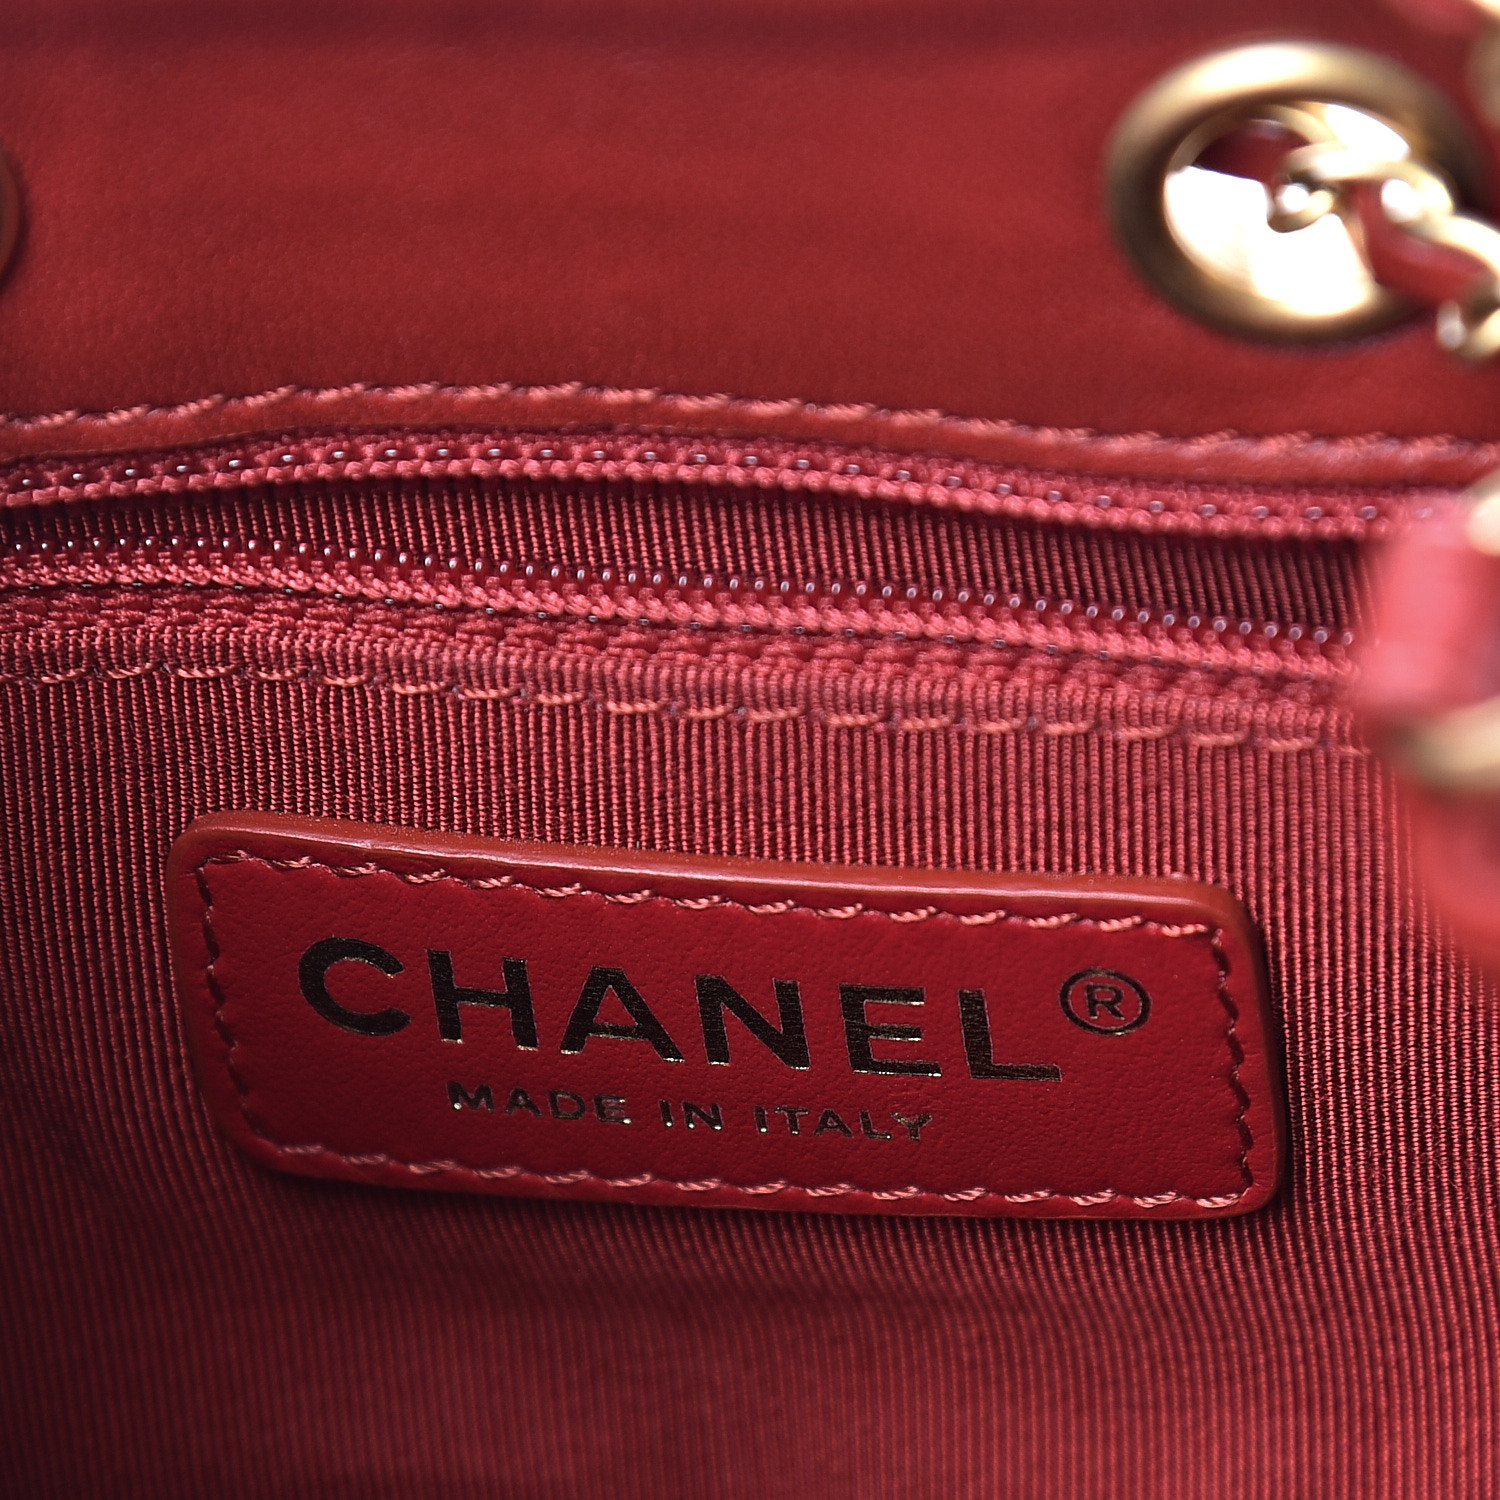 CHANEL Calfskin Stitched Small Egyptian Amulet Drawstring Bag Red ...